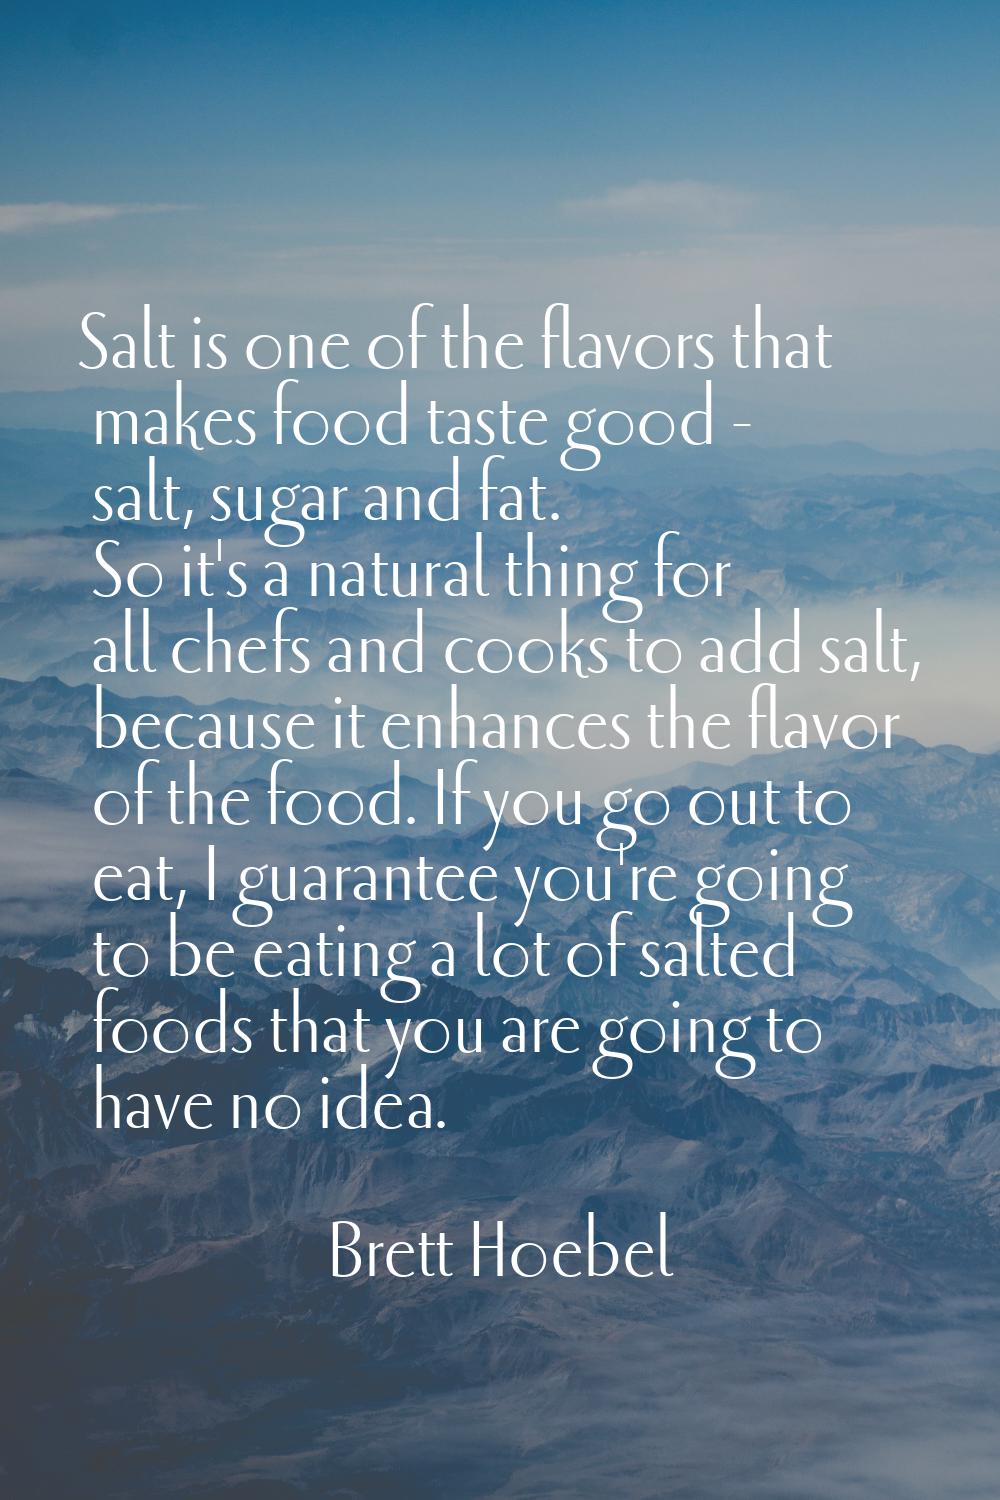 Salt is one of the flavors that makes food taste good - salt, sugar and fat. So it's a natural thin